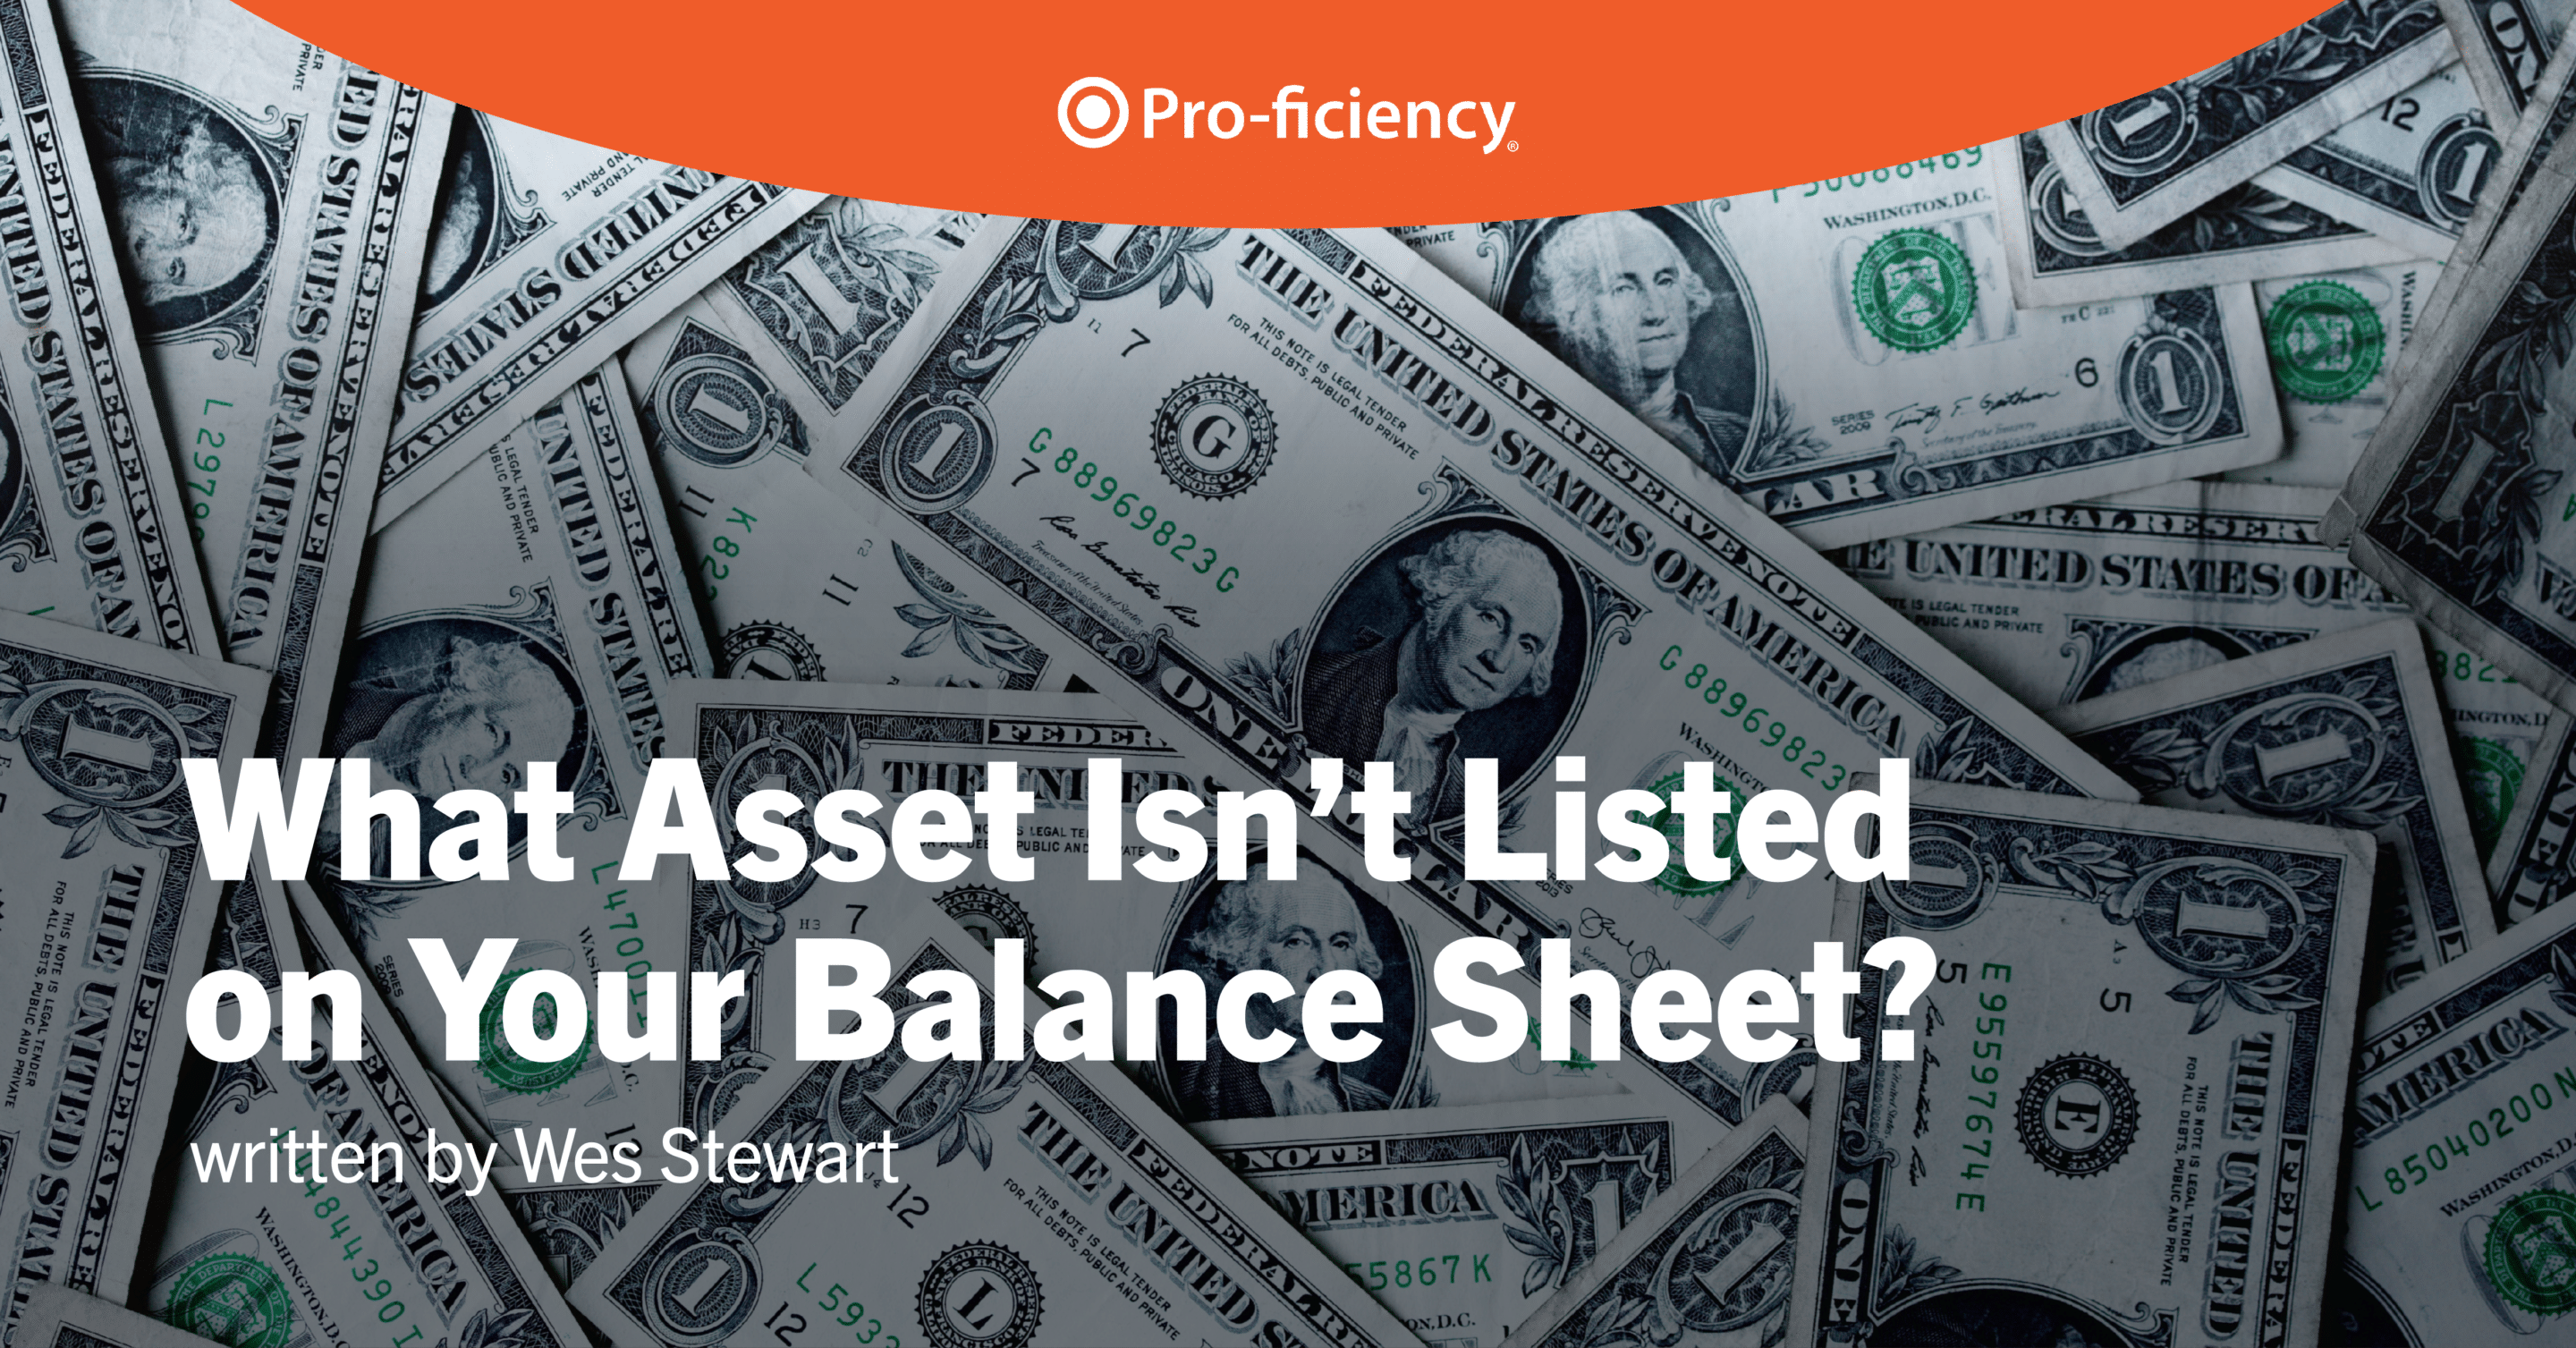 What Asset Isn’t Listed on Your Balance Sheet?